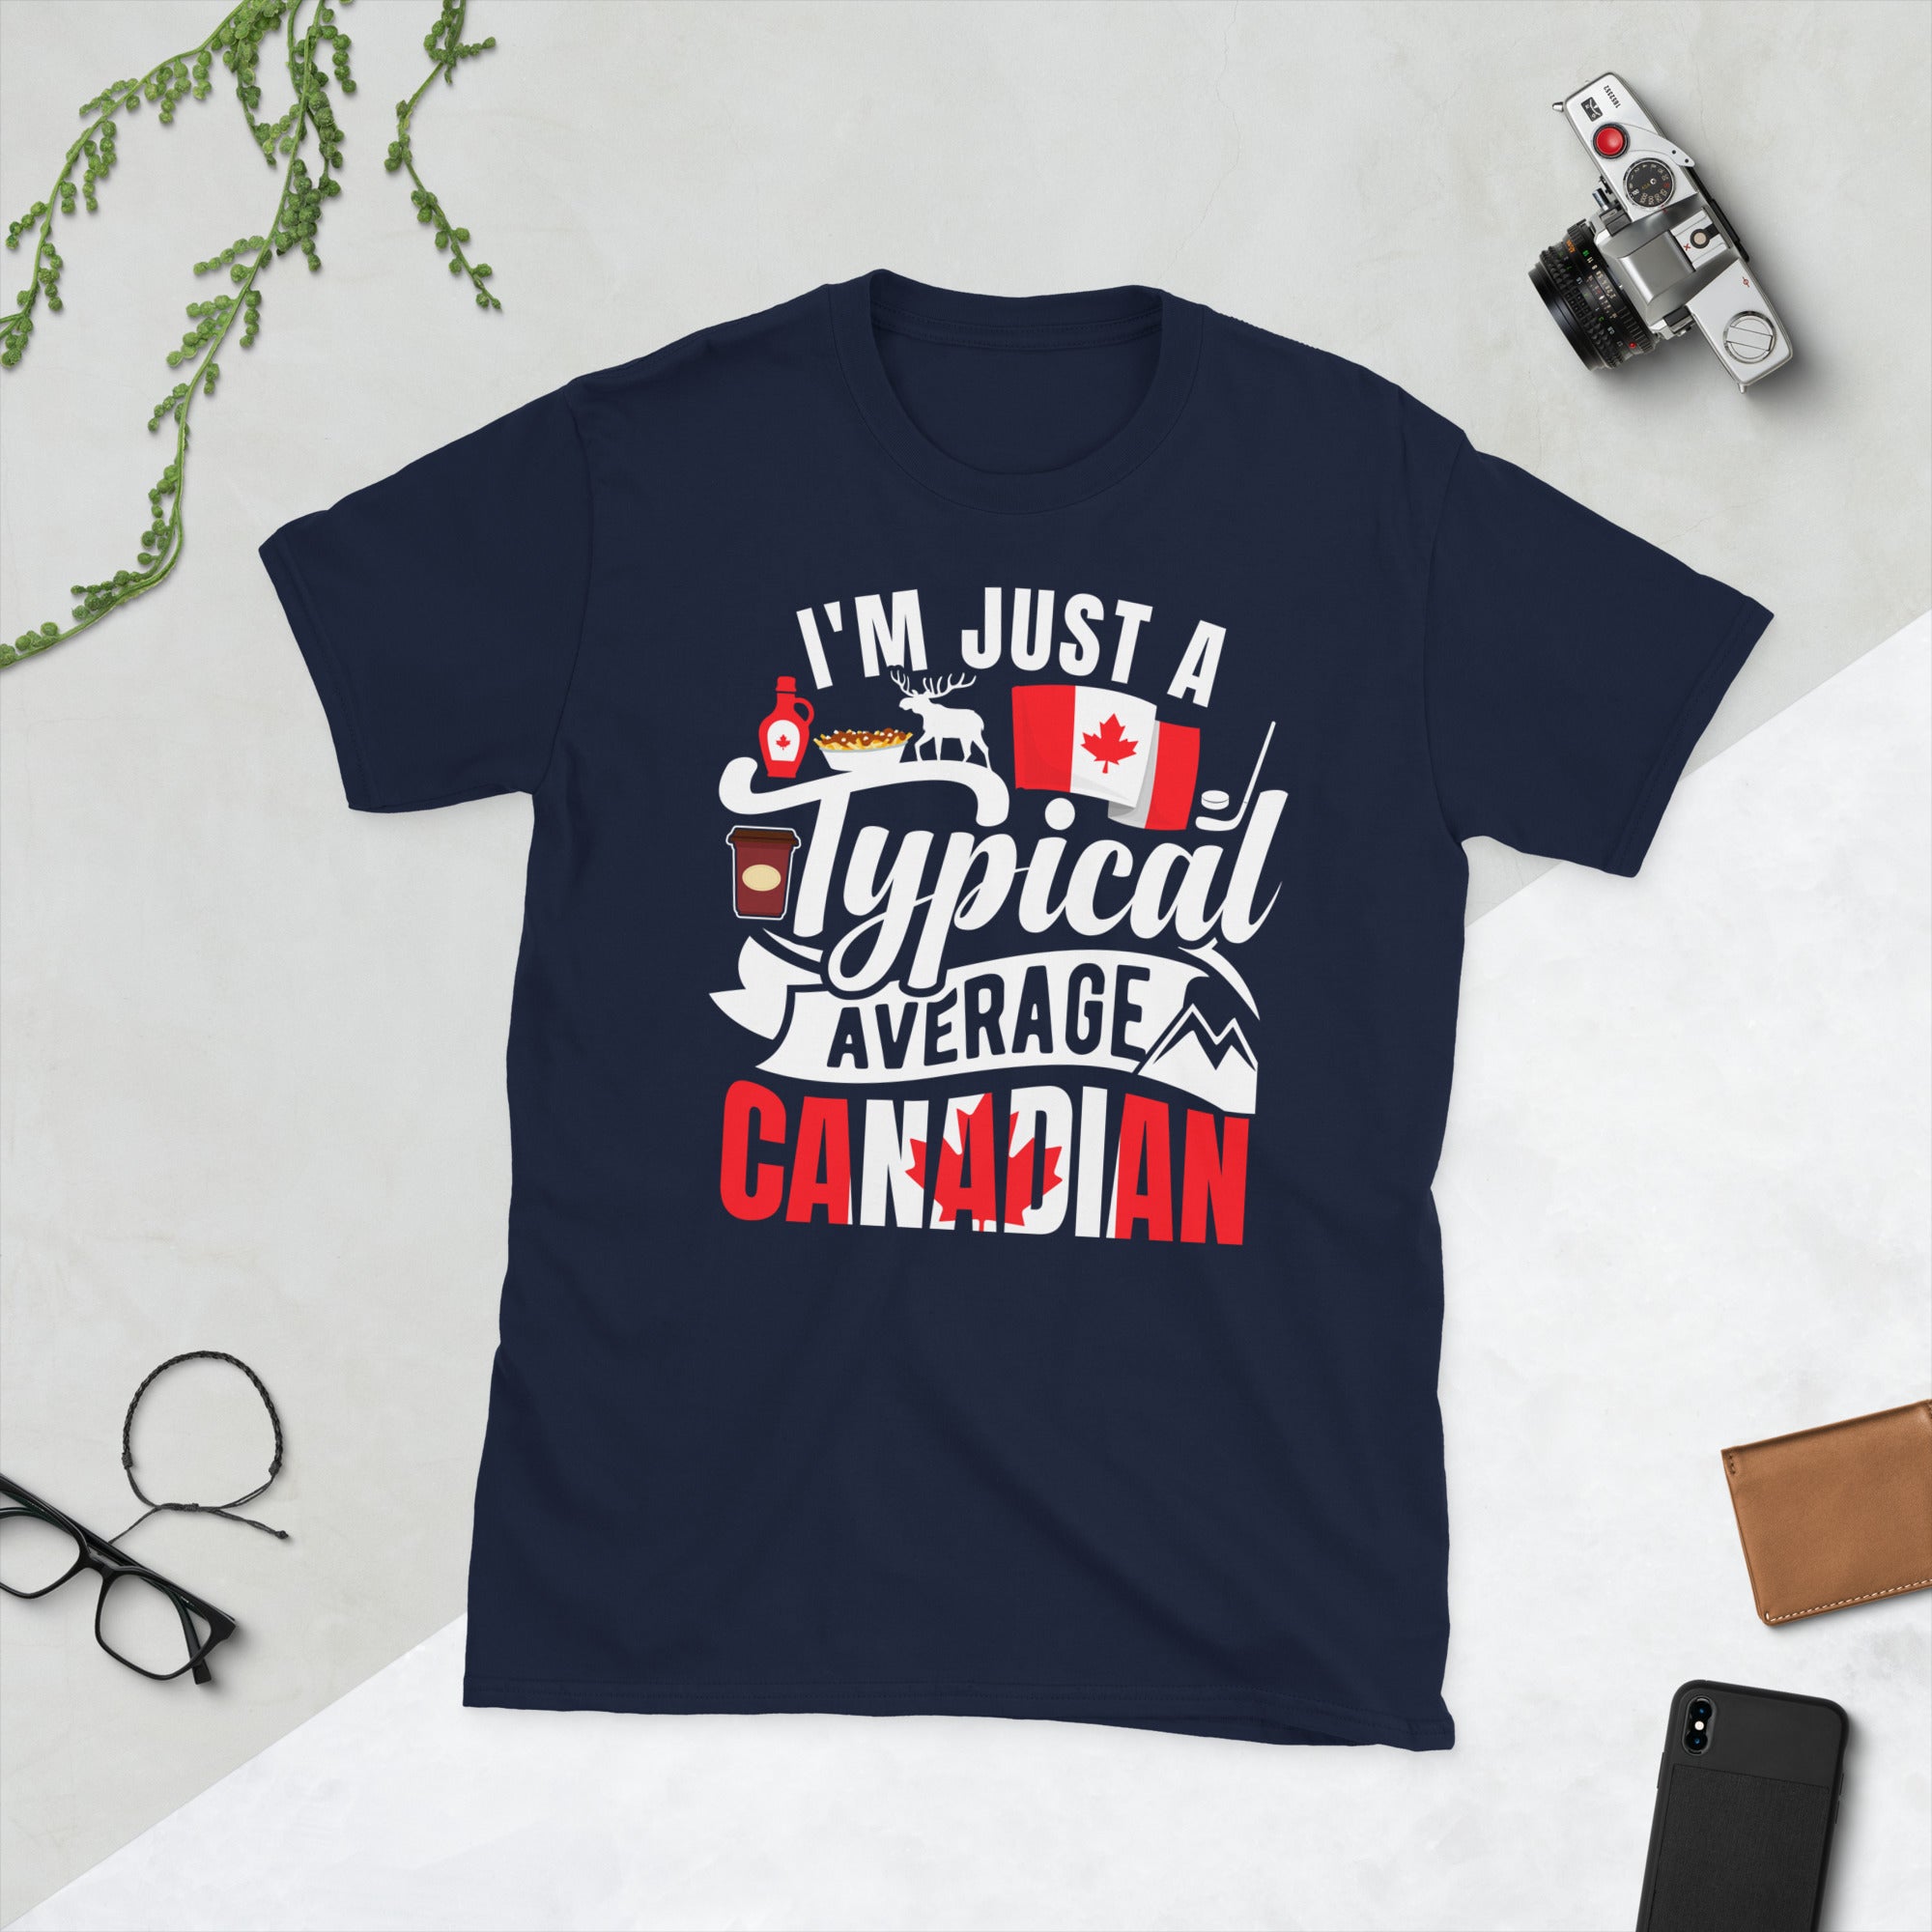 Typical Average Canadian Shirt